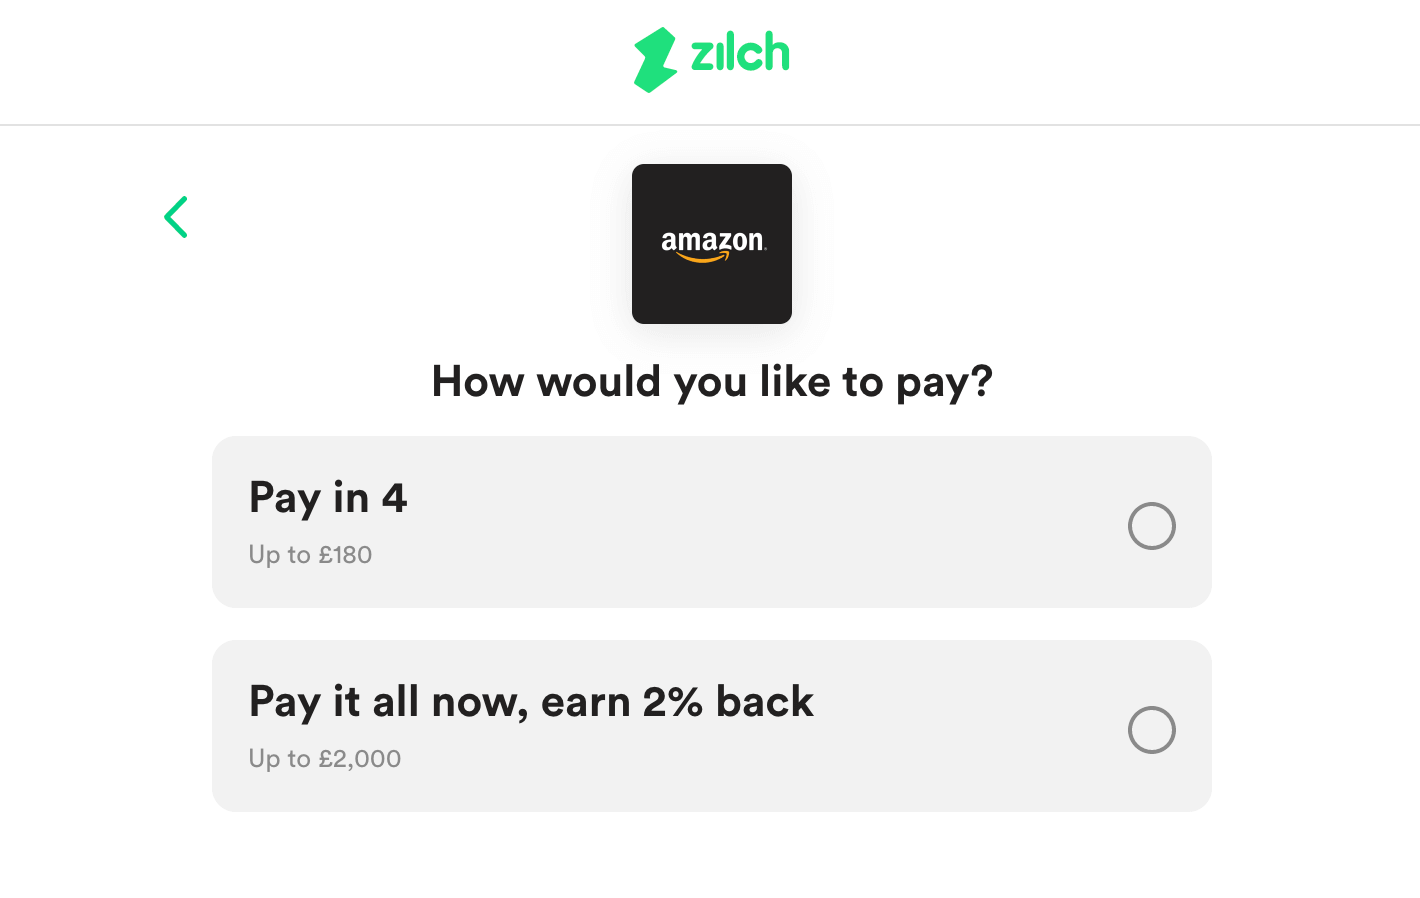 Amazon cashback when you pay in one time with Zilch